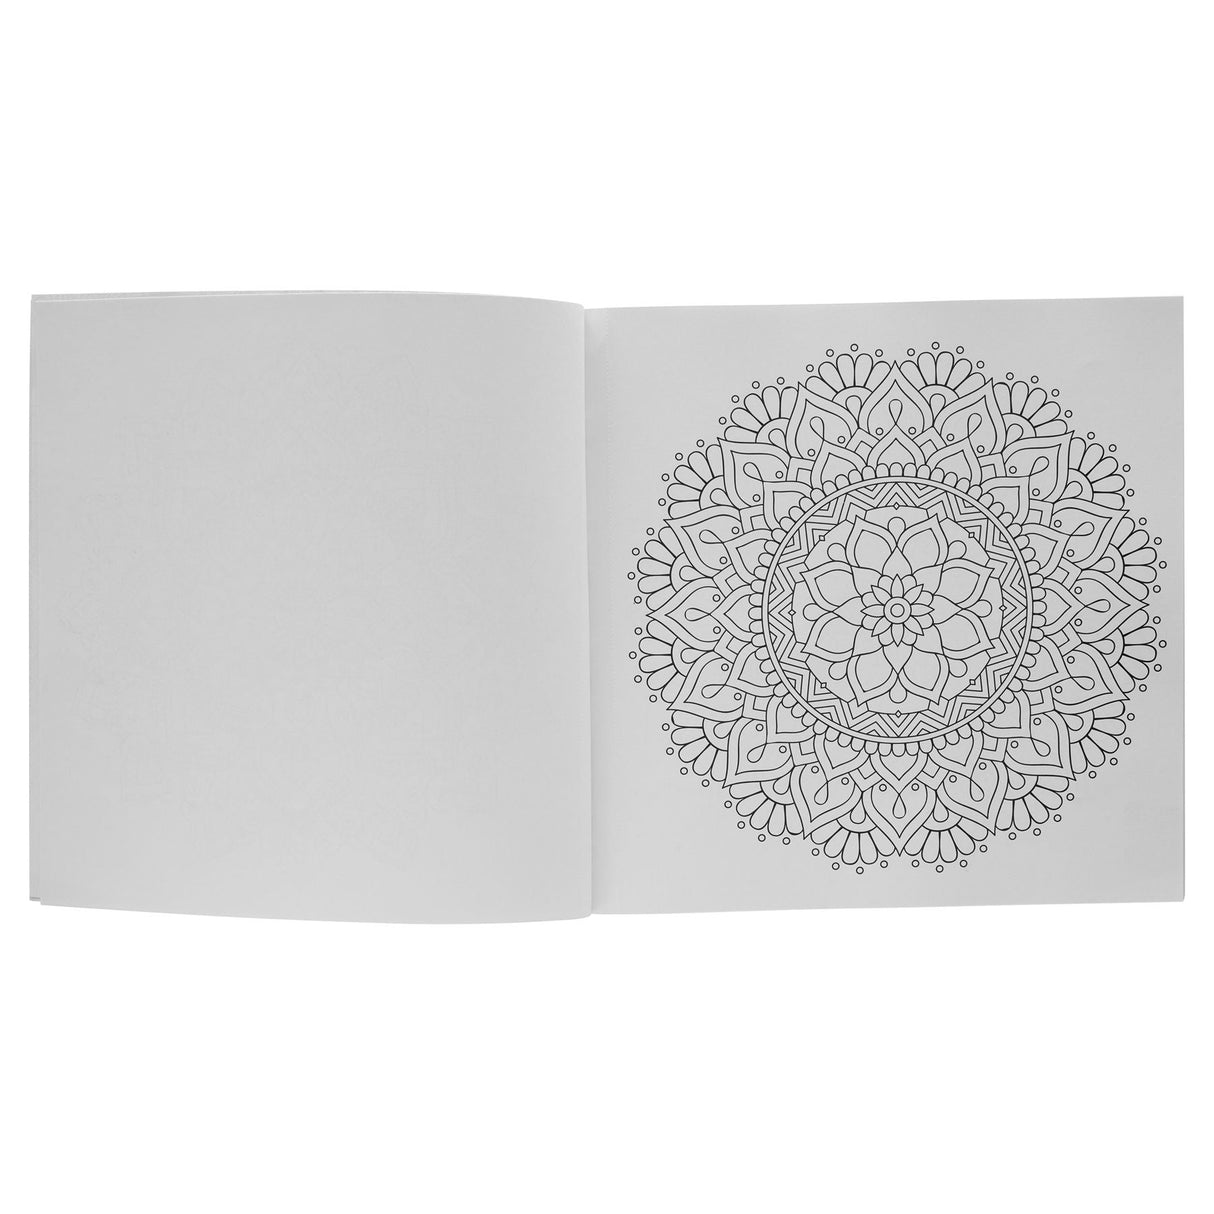 World of Colour Creative - Mindful Colouring Book | Stationery Shop UK